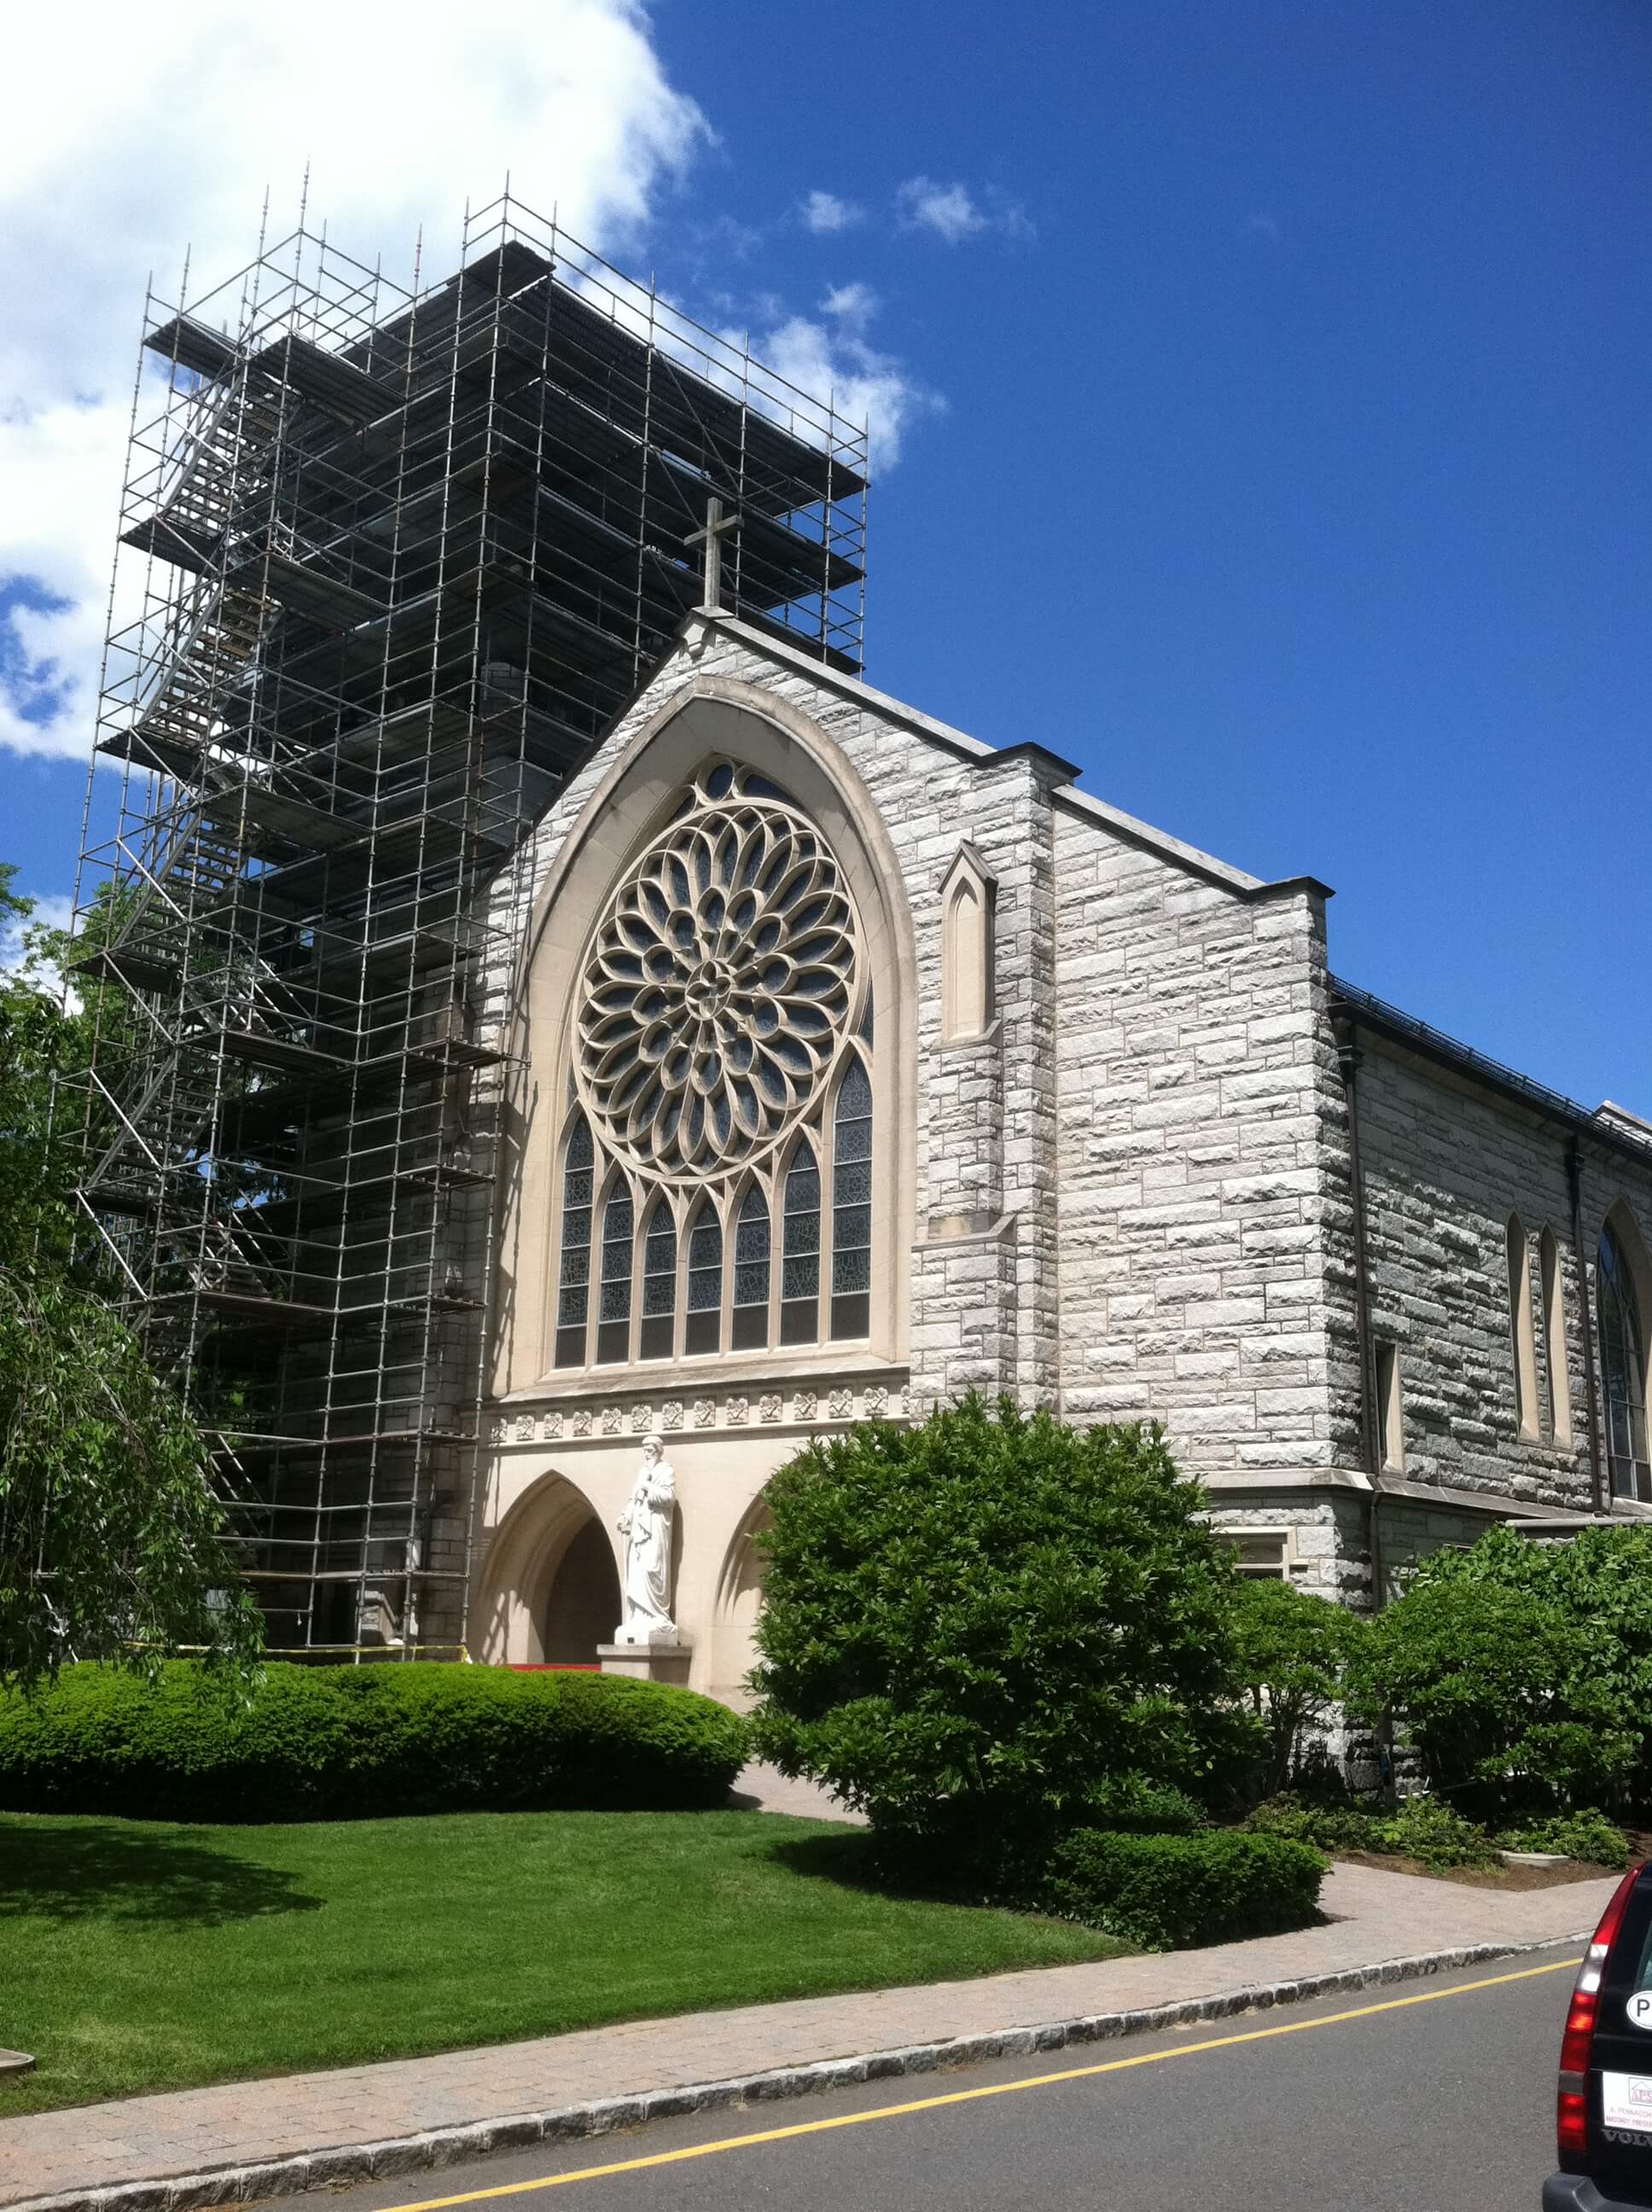 Church restoration and commercial masonry work by A. Pennachi & Son, Co.